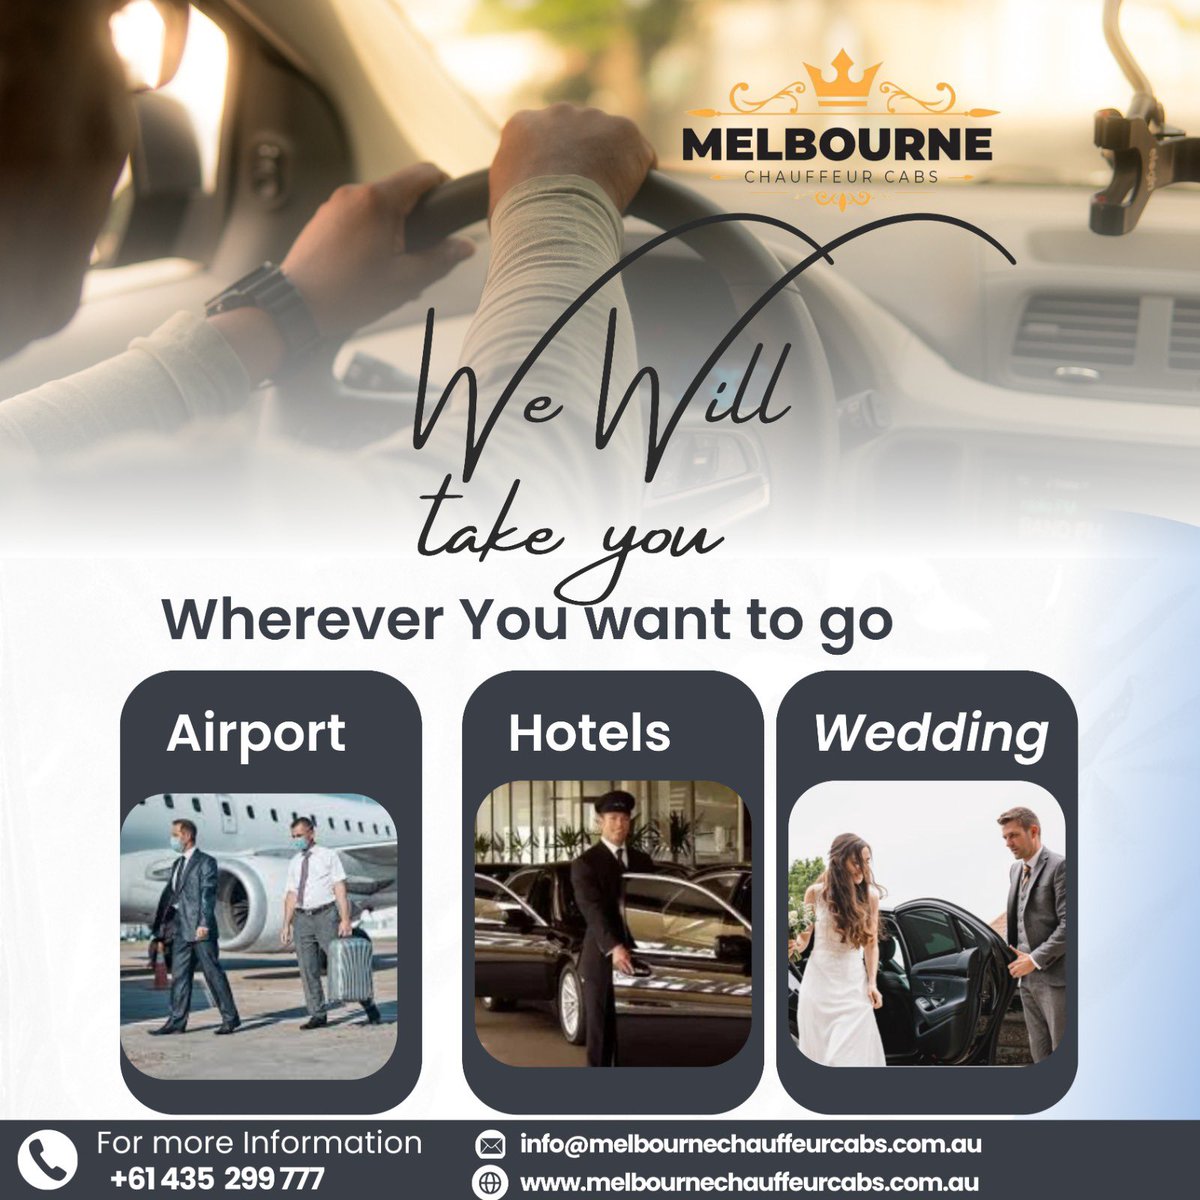 🚖 Melbourne Chauffeur Cabs 🚖 Your one-stop shop for all transport solutions! 🌟 From airport transfers and hotel pickups to conference shuttles, cruise transfers, wedding transportation, winery tours, and more. Sit back, relax, and let us take the wheel. 🍇🥂 📞 Call us at: